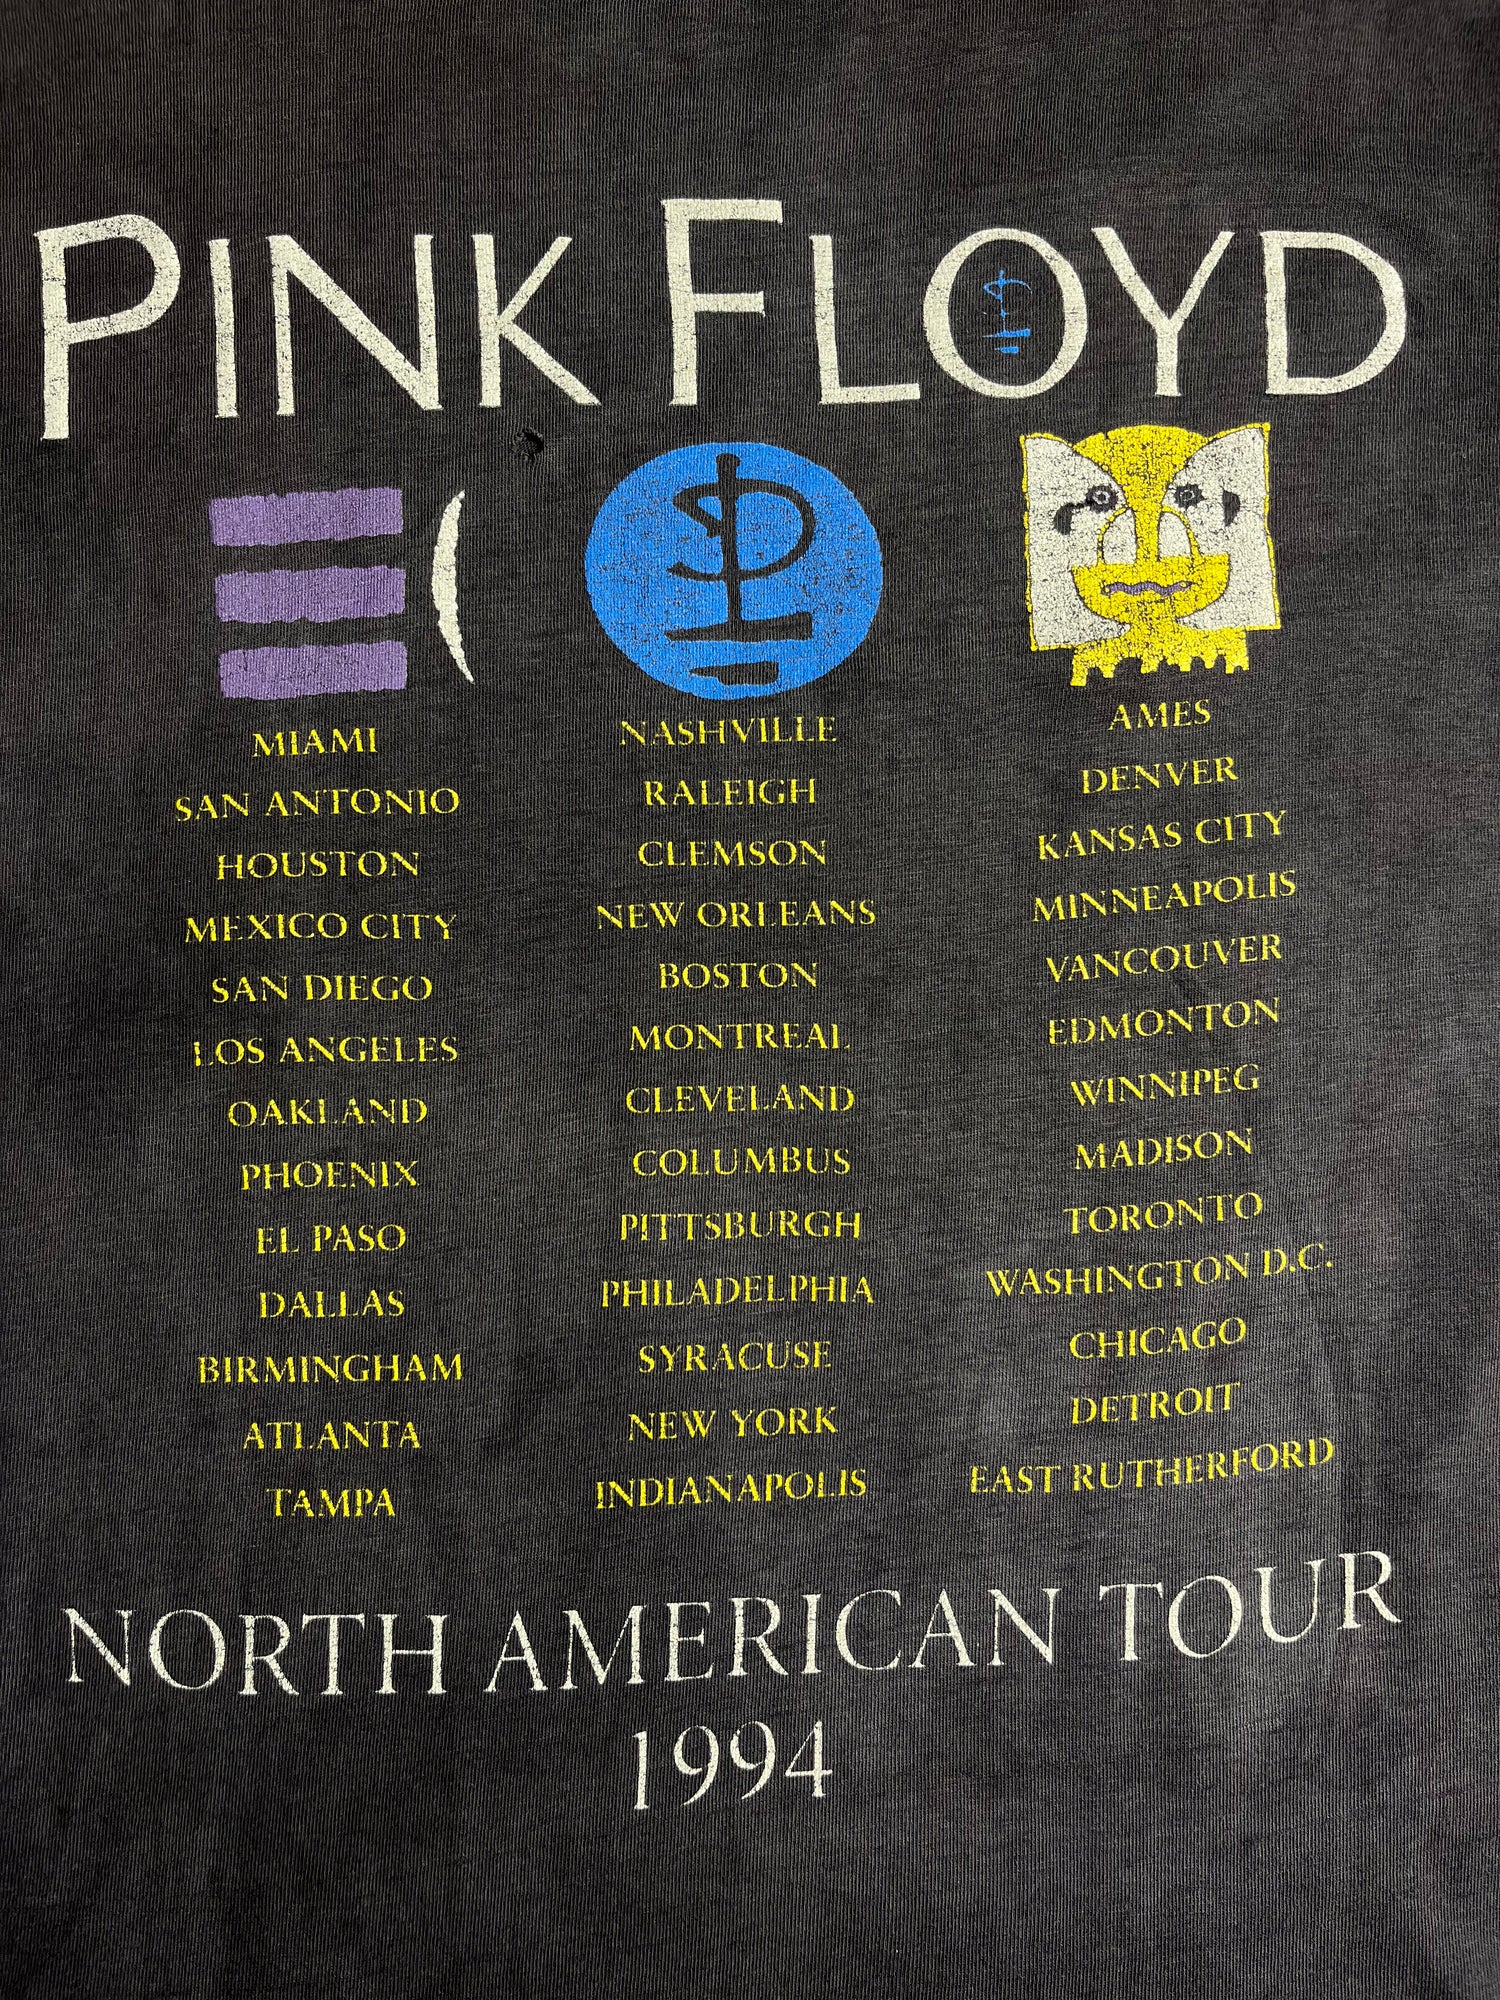 Distressed Grail Rare Vintage Pink Floyd s Band T shirt North